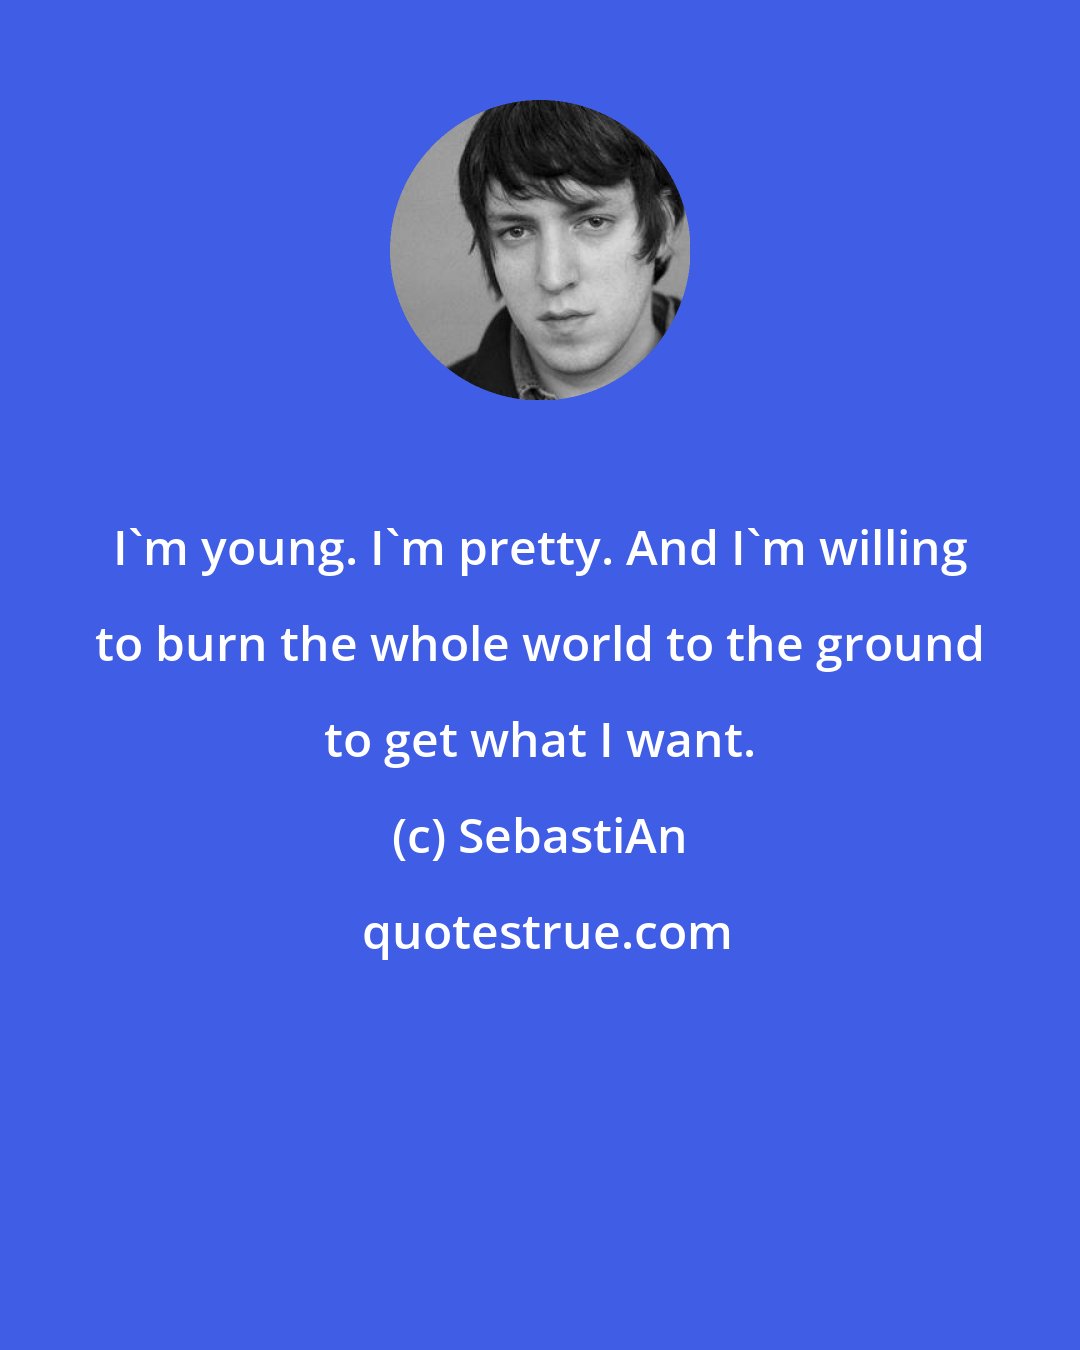 SebastiAn: I'm young. I'm pretty. And I'm willing to burn the whole world to the ground to get what I want.